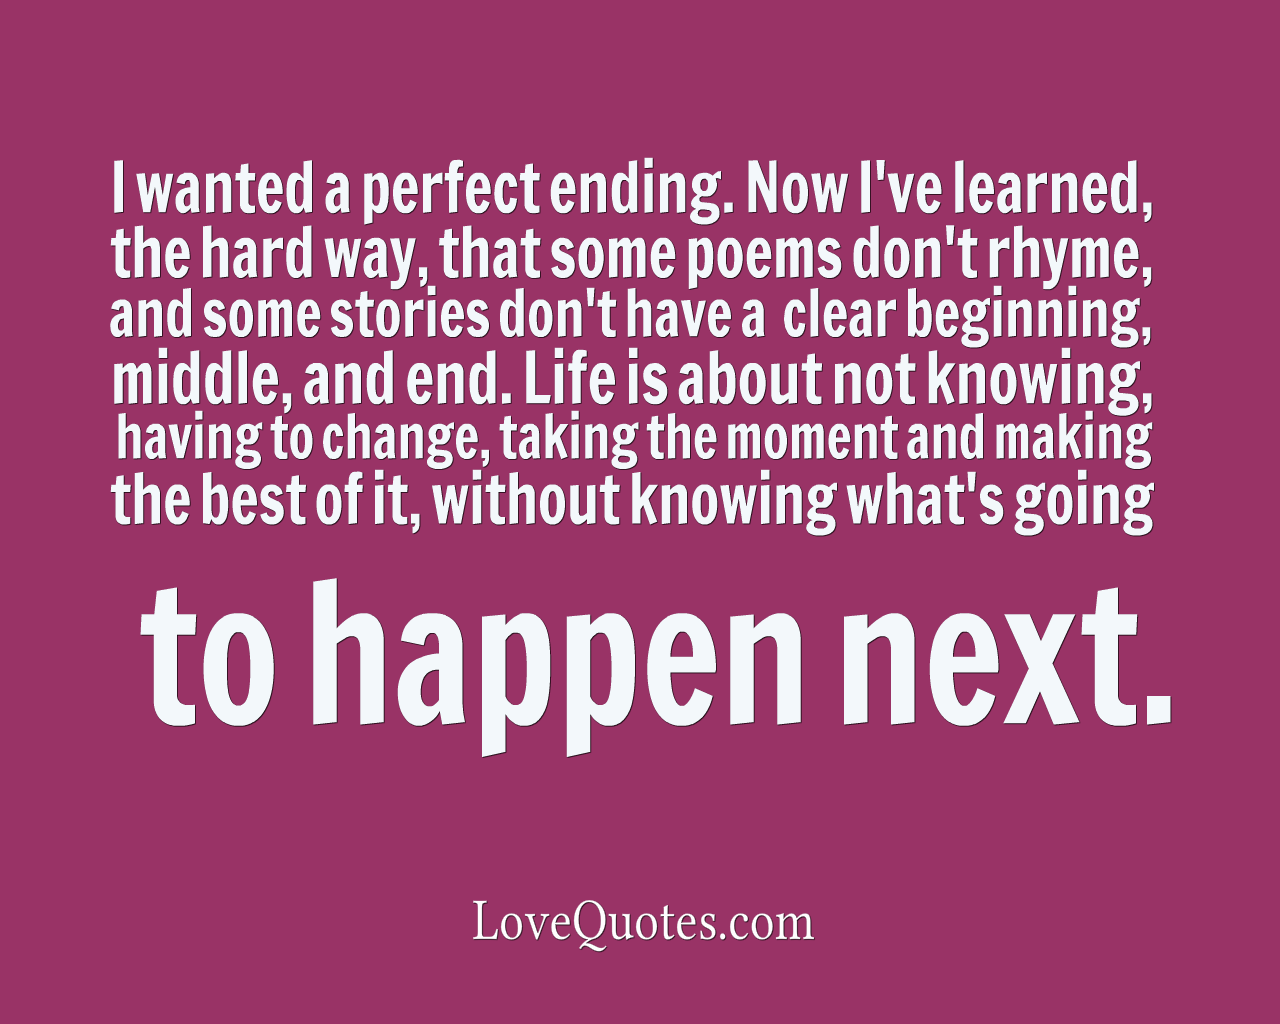 A Perfect Ending - Love Quotes